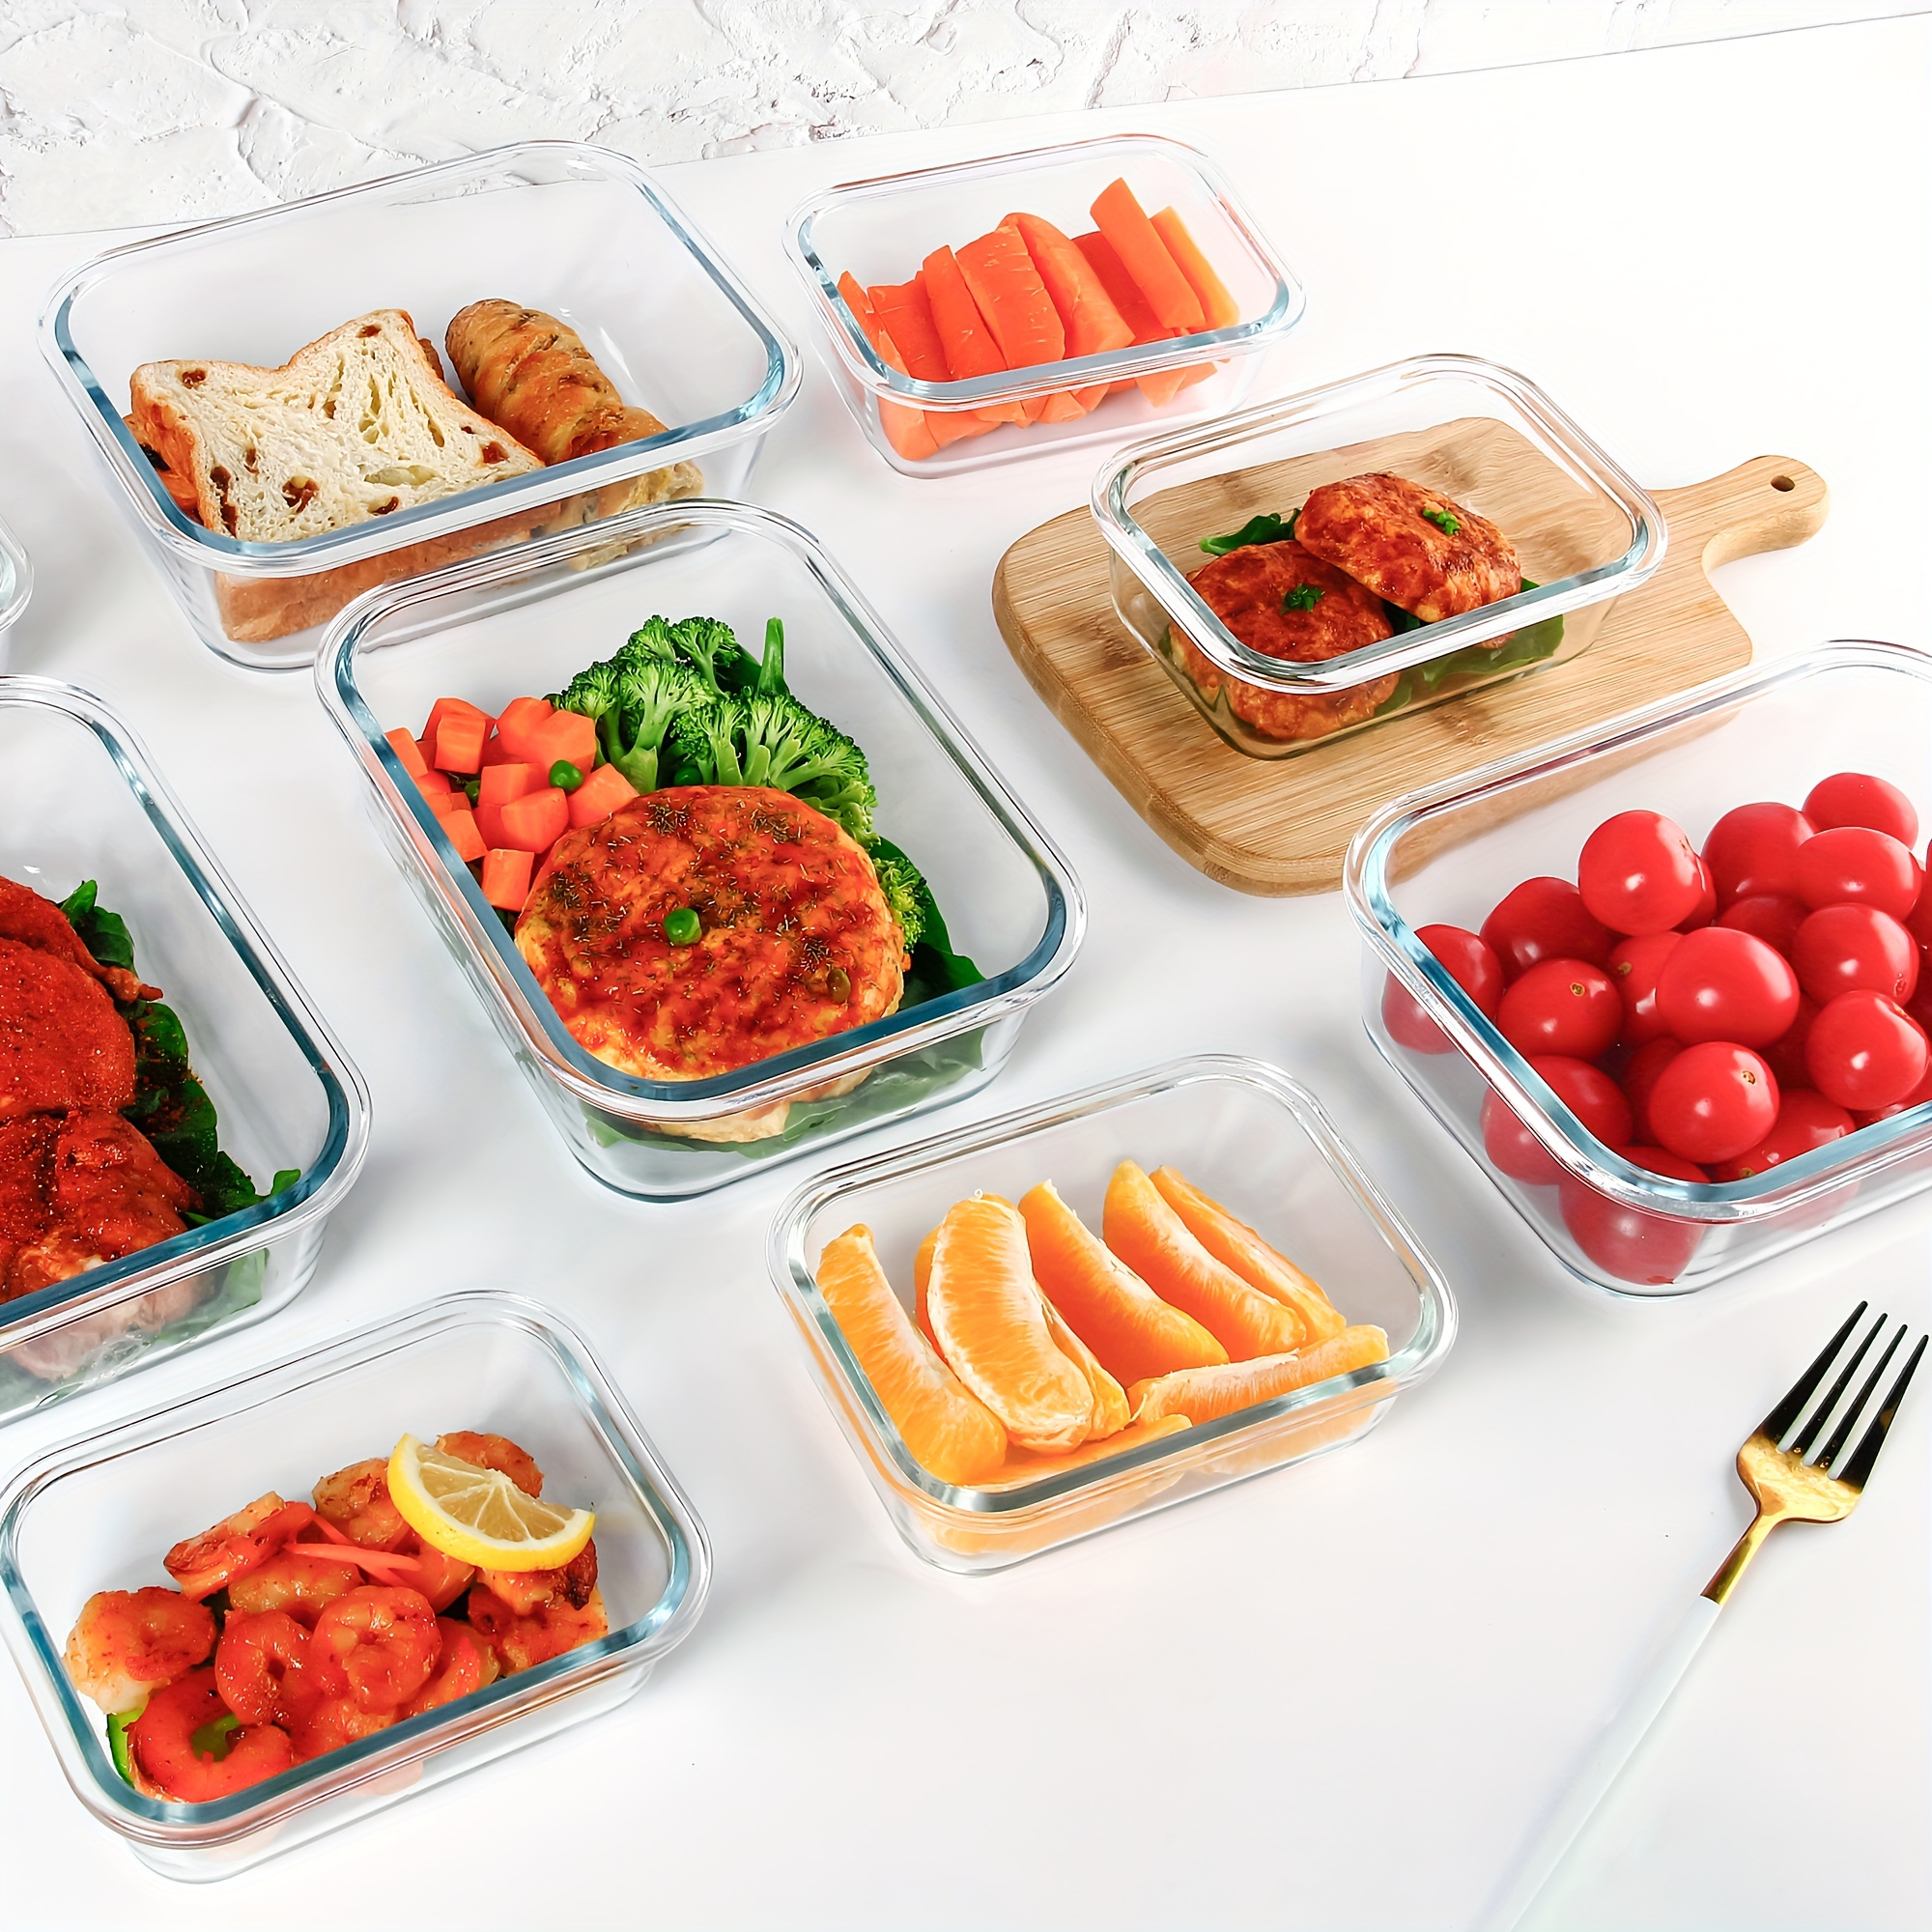 Premium Borosilcate Glass Meal Prep Food Containers with Snap